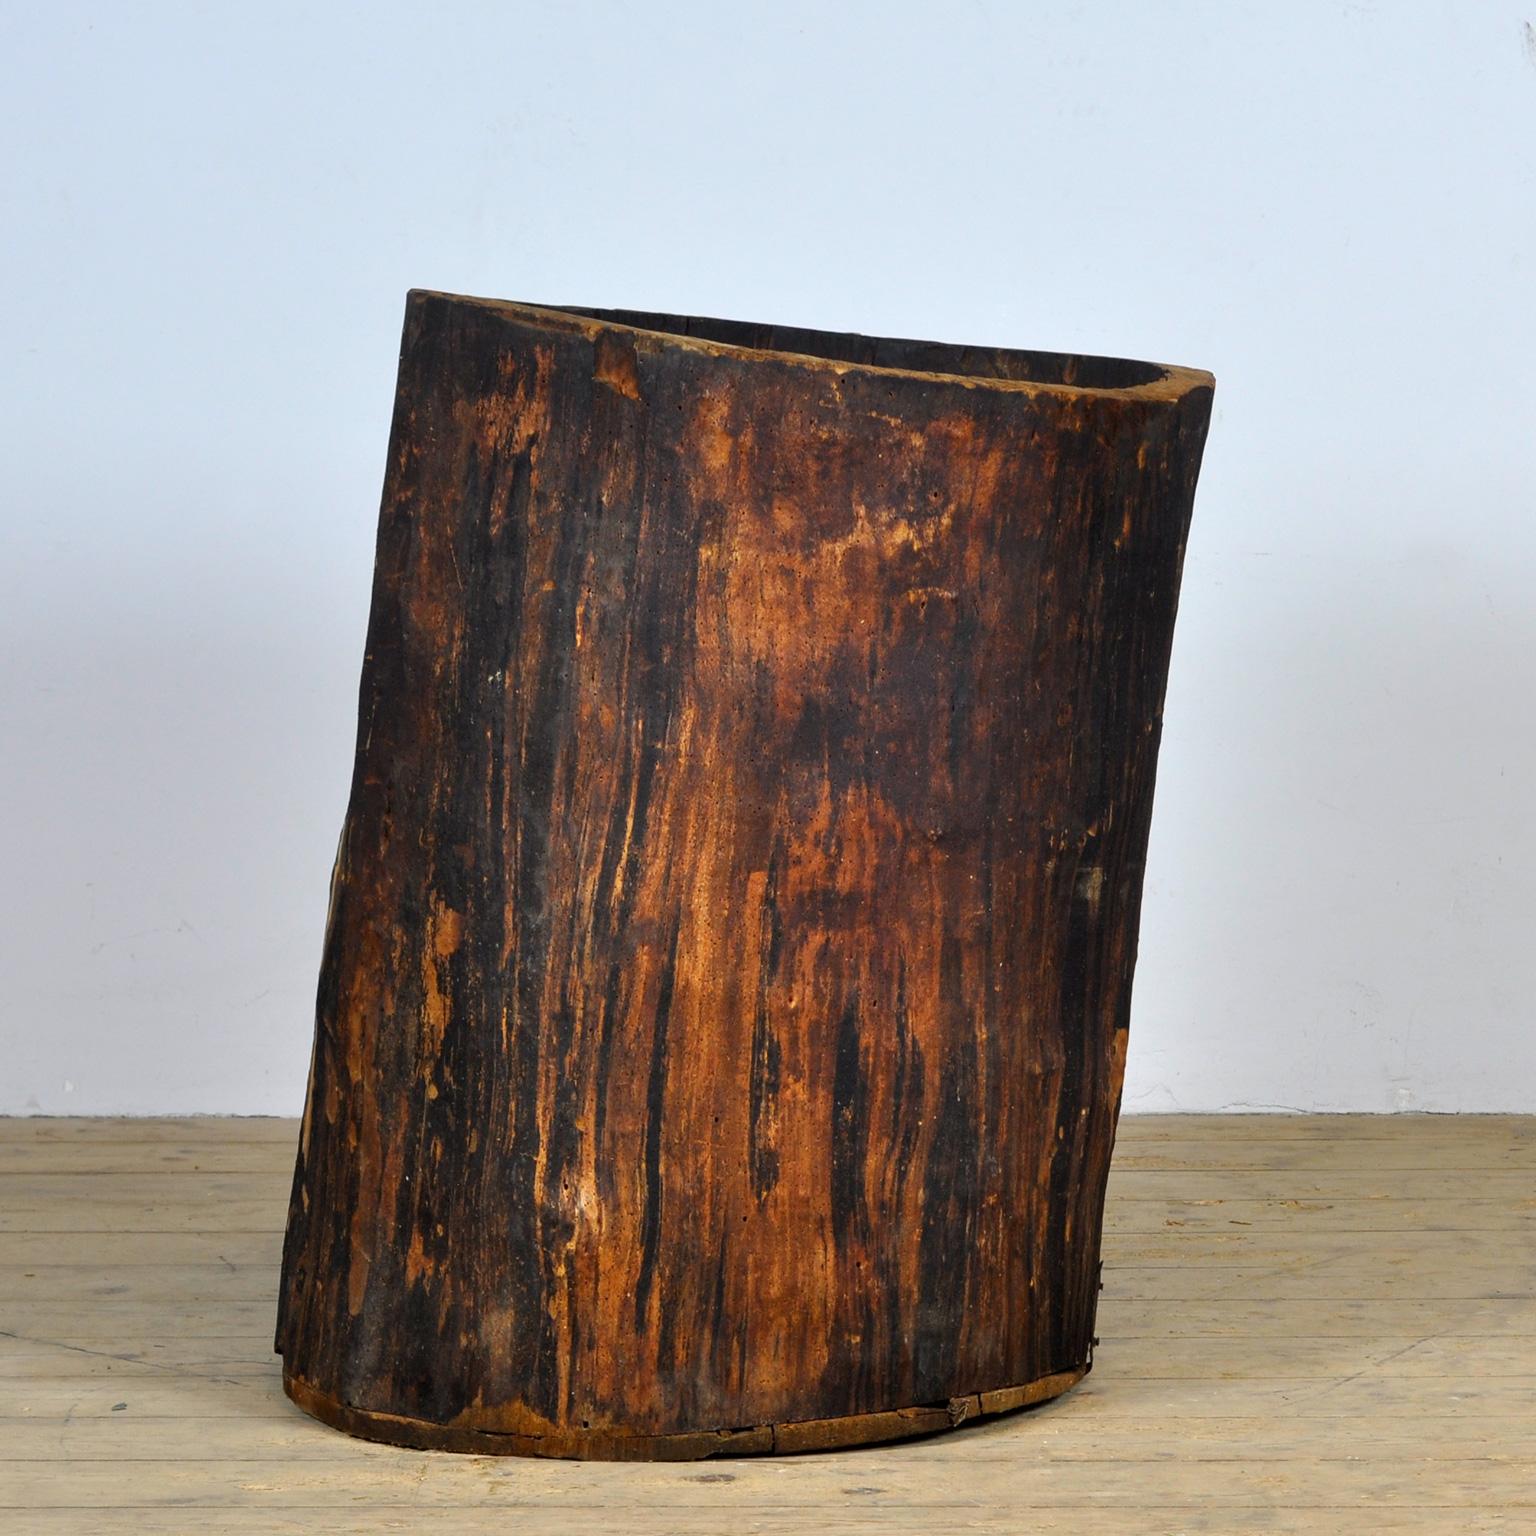 Hollowed out tree trunk used for storing grain etc. Hollowed out by hand. Beautiful object to use as a large planter. The item is made of hardwood and weighs approximately 50kg. Circa 1900.